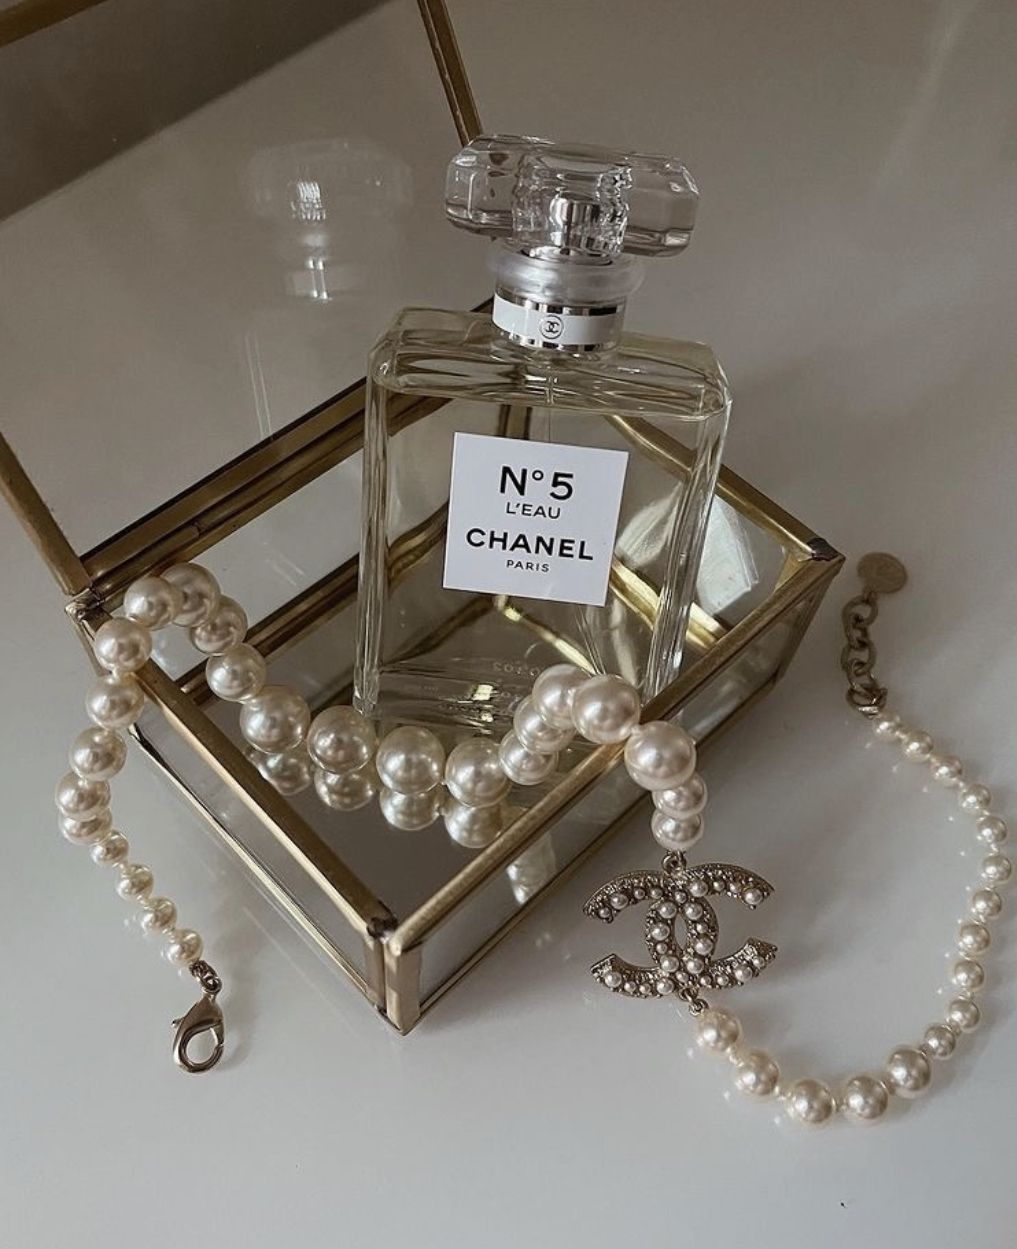 Chanel No 5 Bath Oil  Quirky Finds